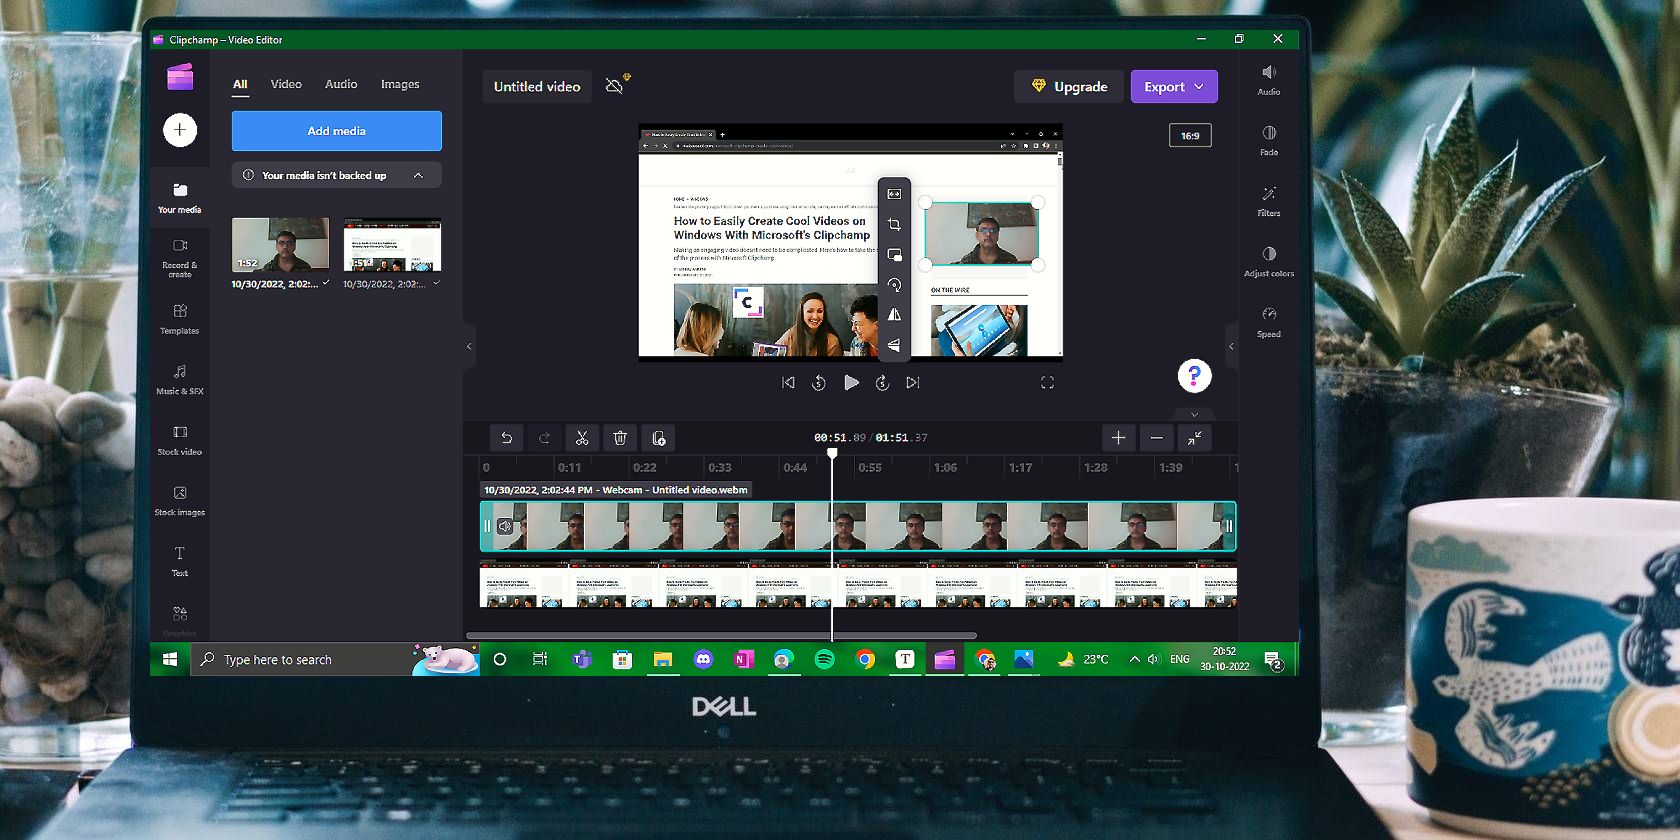 Windows Laptop With Clipchamp Video Editor on Screen